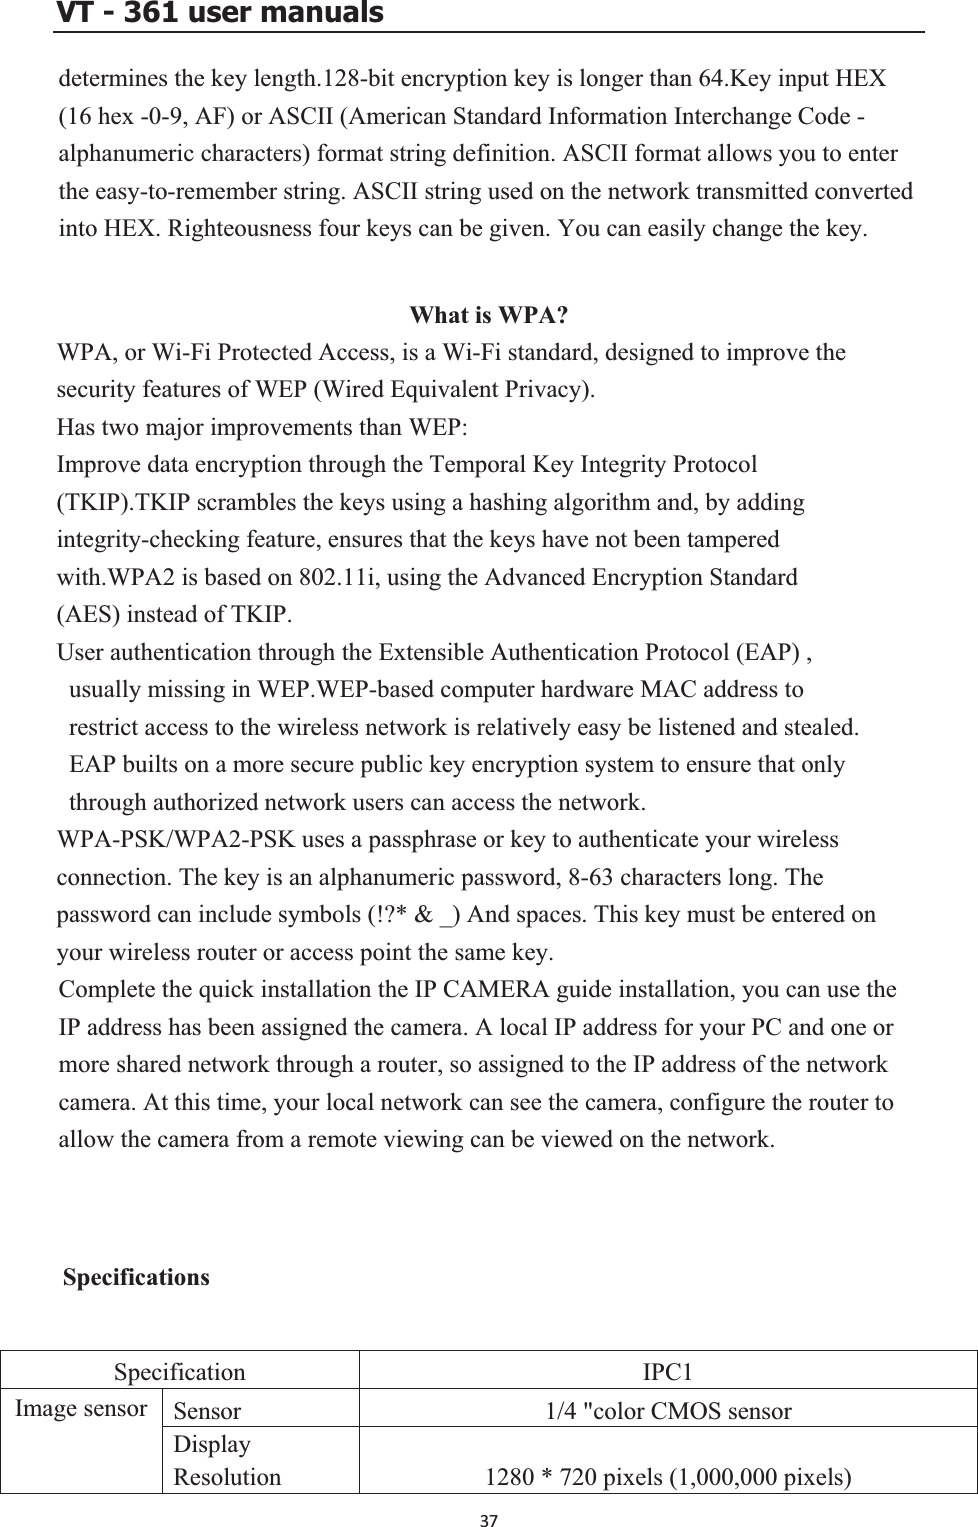 VT - 361 user manualsd .Key input HEX ( Code - alphanumeric characters) format string definition. ASCII format allows you to enter t ertediWhat is WPA? WPA, or Wi-Fi Protected Access, is a Wi-Fi standard, designed to improve the s Wired Equivalent Privacy). HIm(T addingin -checking feature, ensures that the keys have not been tampered wd(U, g in WEP.WEP-based computer hardware MAC address to t access to the wireless network is relatively easy be listened and stealed.   n a more secure public key encryption system to ensure that only through authorized network users can access the network. WPA-PSK/WPA2-PSK uses a passphrase or key to authenticate your wireless  is an alphanumeric password, 8-63 characters long. The password can include symbols (!?* &amp; _) And spaces. This key must be entered on your wireless router or access point the same key. Complete the quick installation the IP CAMERA guide installation, you can use the ork through a router, so assigned to the IP address of the network see the camera, configure the router to all  be viewed on the network.  Specifications etermines the key length.128-bit encryption key is longer than 6416 hex -0-9, AF) or ASCII (American Standard Information Interchange he easy-to-remember string. ASCII string used on the network transmitted convnto HEX. Righteousness four keys can be given. You can easily change the key. ecurity features of WEP (as two major improvements than WEP: prove data encryption through the Temporal Key Integrity Protocol KIP).TKIP scrambles the keys using a hashing algorithm and, by tegrityith.WPA2 is based on 802.11i, using the Advanced Encryption StandarAES) instead of TKIP. ser authentication through the Extensible Authentication Protocol (EAP) usually missinrestricEAP builts oconnection. The keyIP address has been assigned the camera. A local IP address for your PC and one or more shared netwcamera. At this time, your local network can ow the camera from a remote viewing canSpecification IPC1 Sensor 1/4 &quot;color CMOS sensor Ima)ge sensor DisplayResolution 1280 * 720 pixels (1,000,000 pixels37